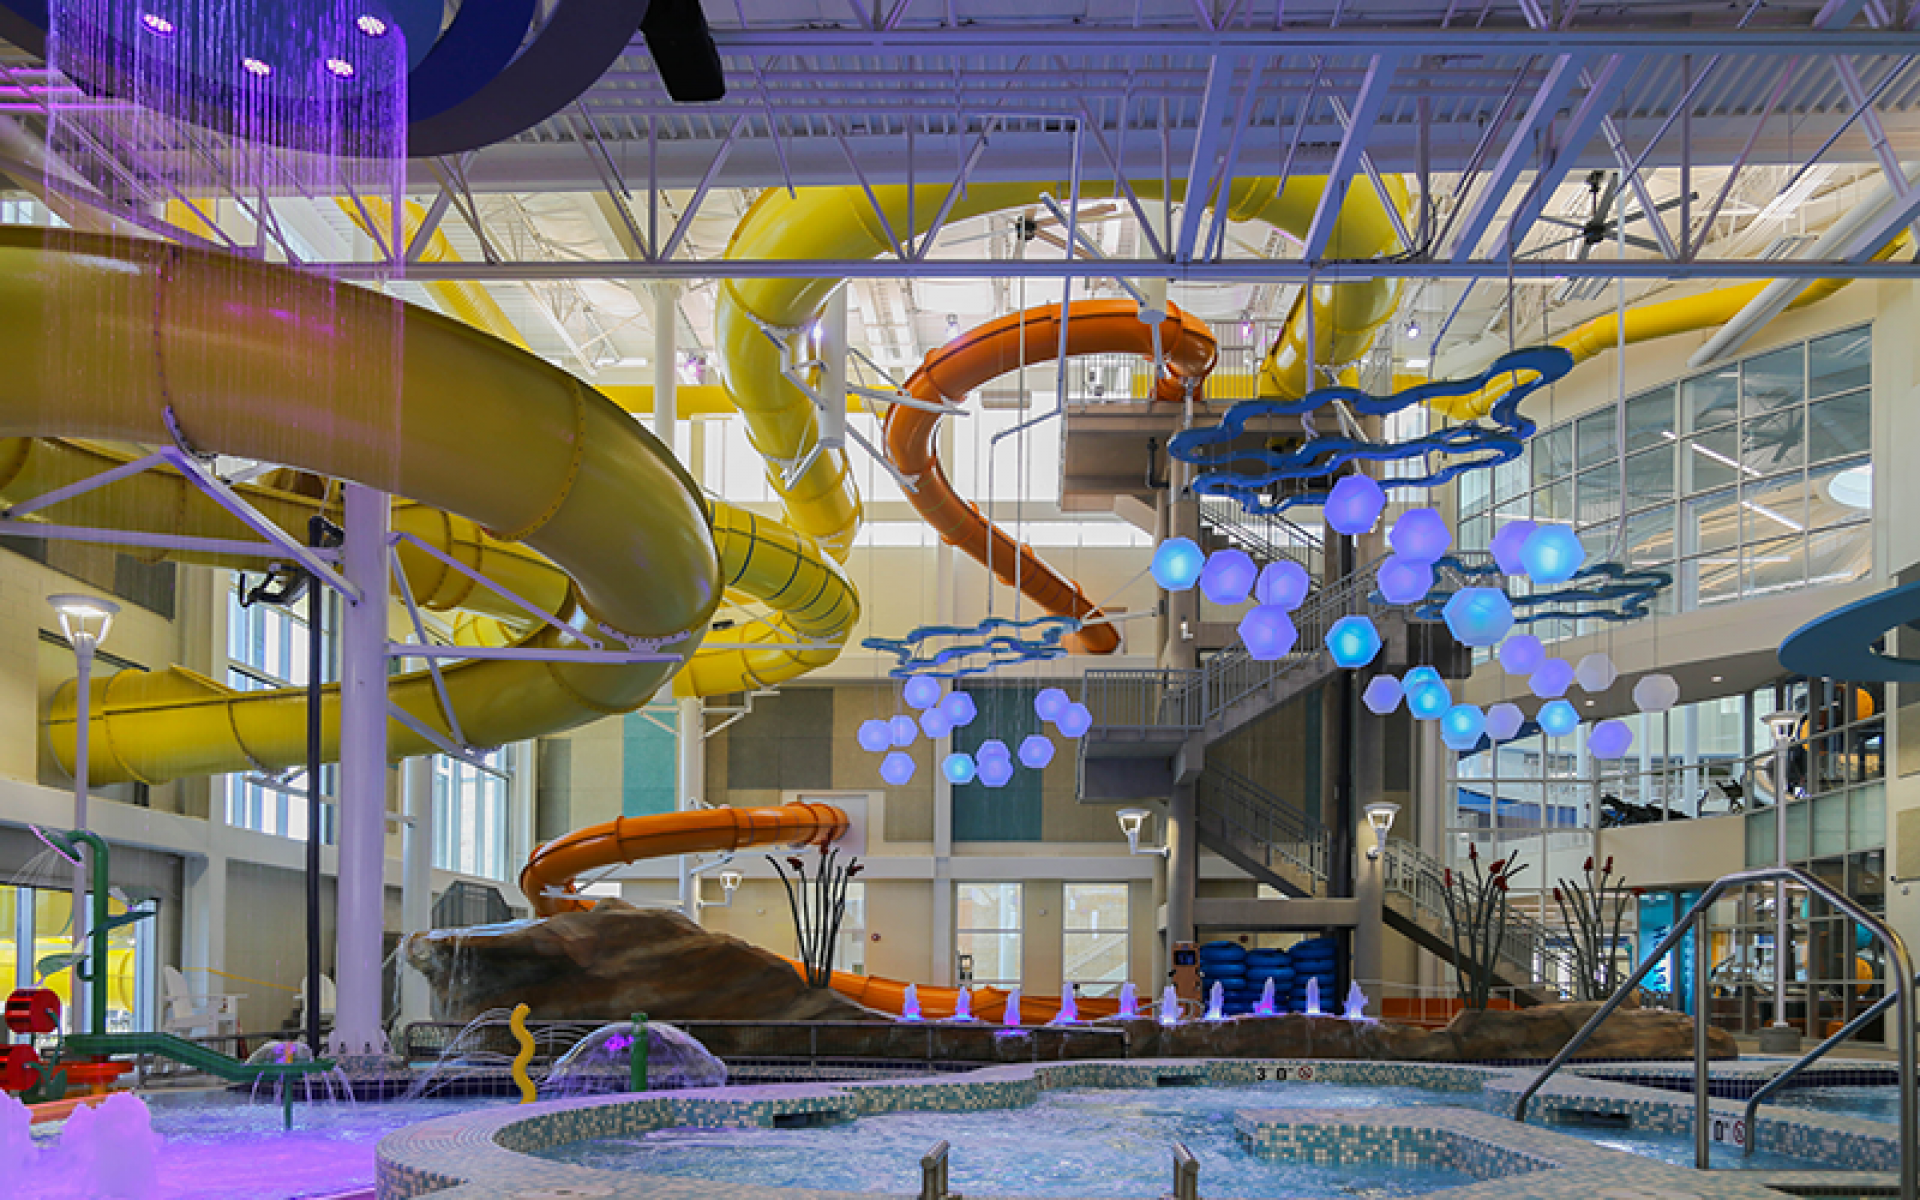 WWA 2018 Leading Edge Award Winner: The Center of Recreational Excellence (CORE) Waterpark